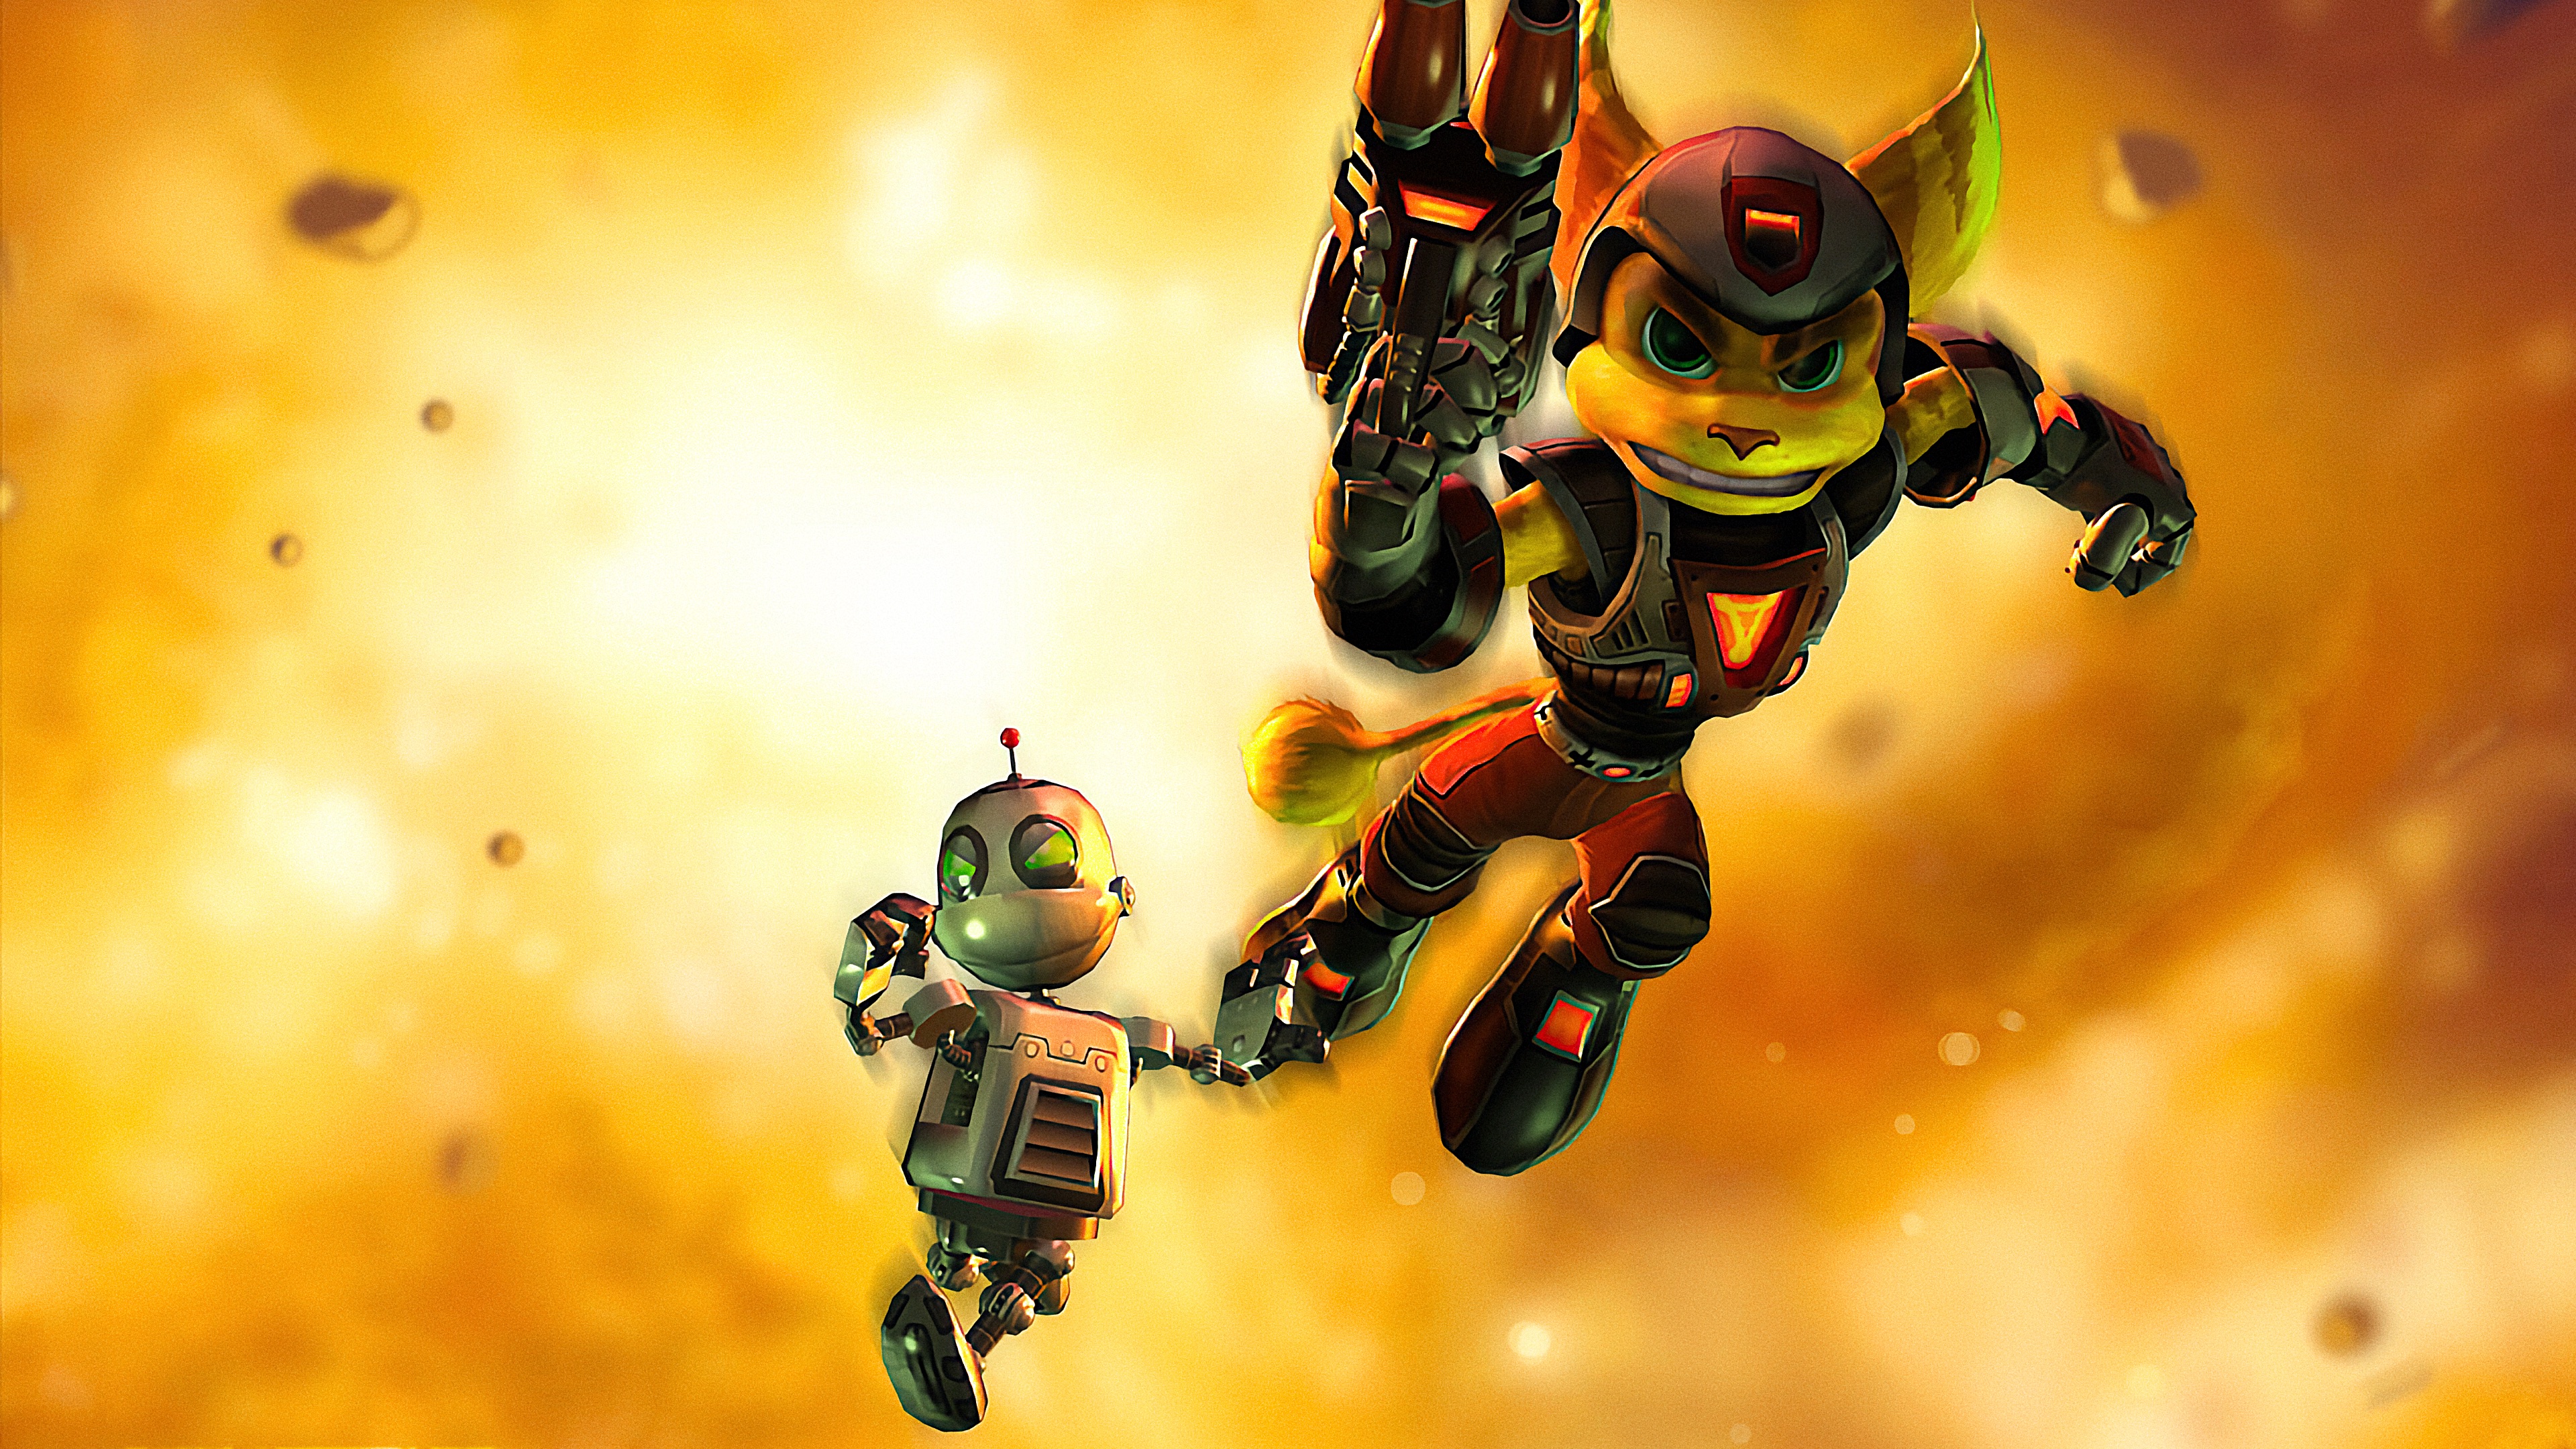 Ratchet Clank PlayStation 2 Video Game Heroes Digital Art Video Games 3840x2160